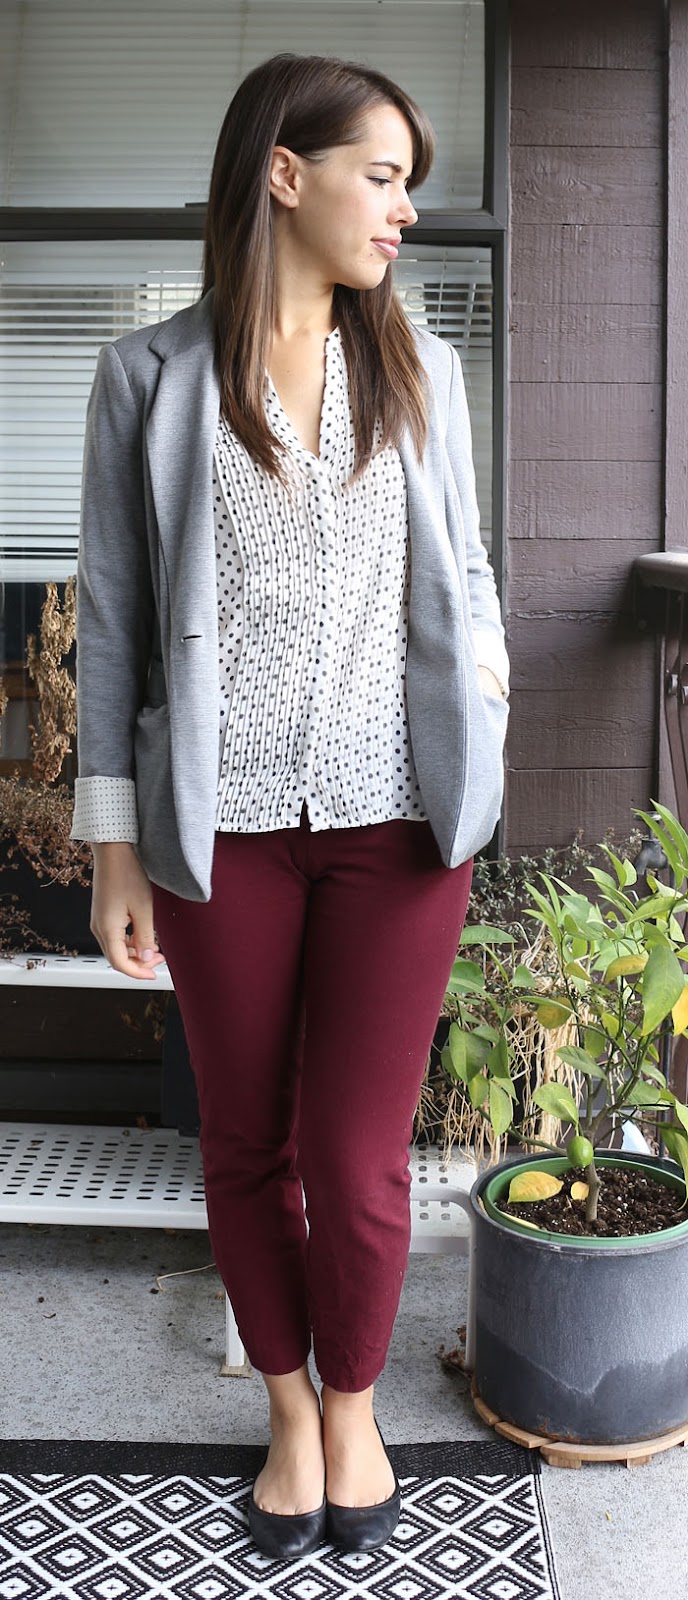 jules in flats: personal style blog - business casual workwear on a budget October 2015 Outfits Week 1 and 2